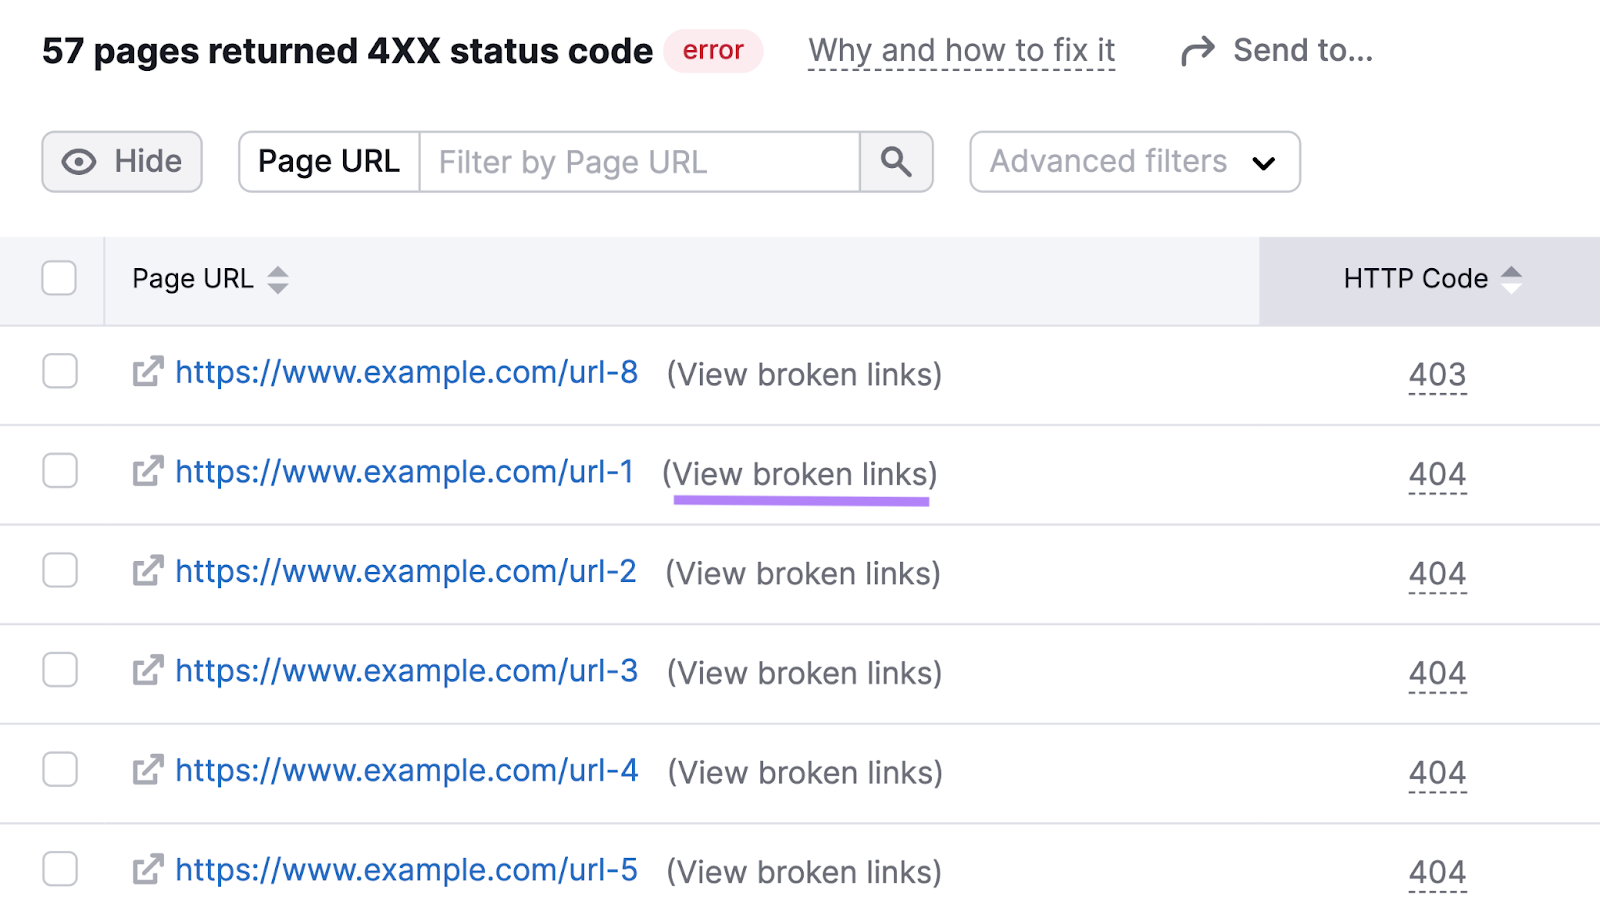 “(View broken links)” highlighted next to a page URL leading to a 404 error from the list